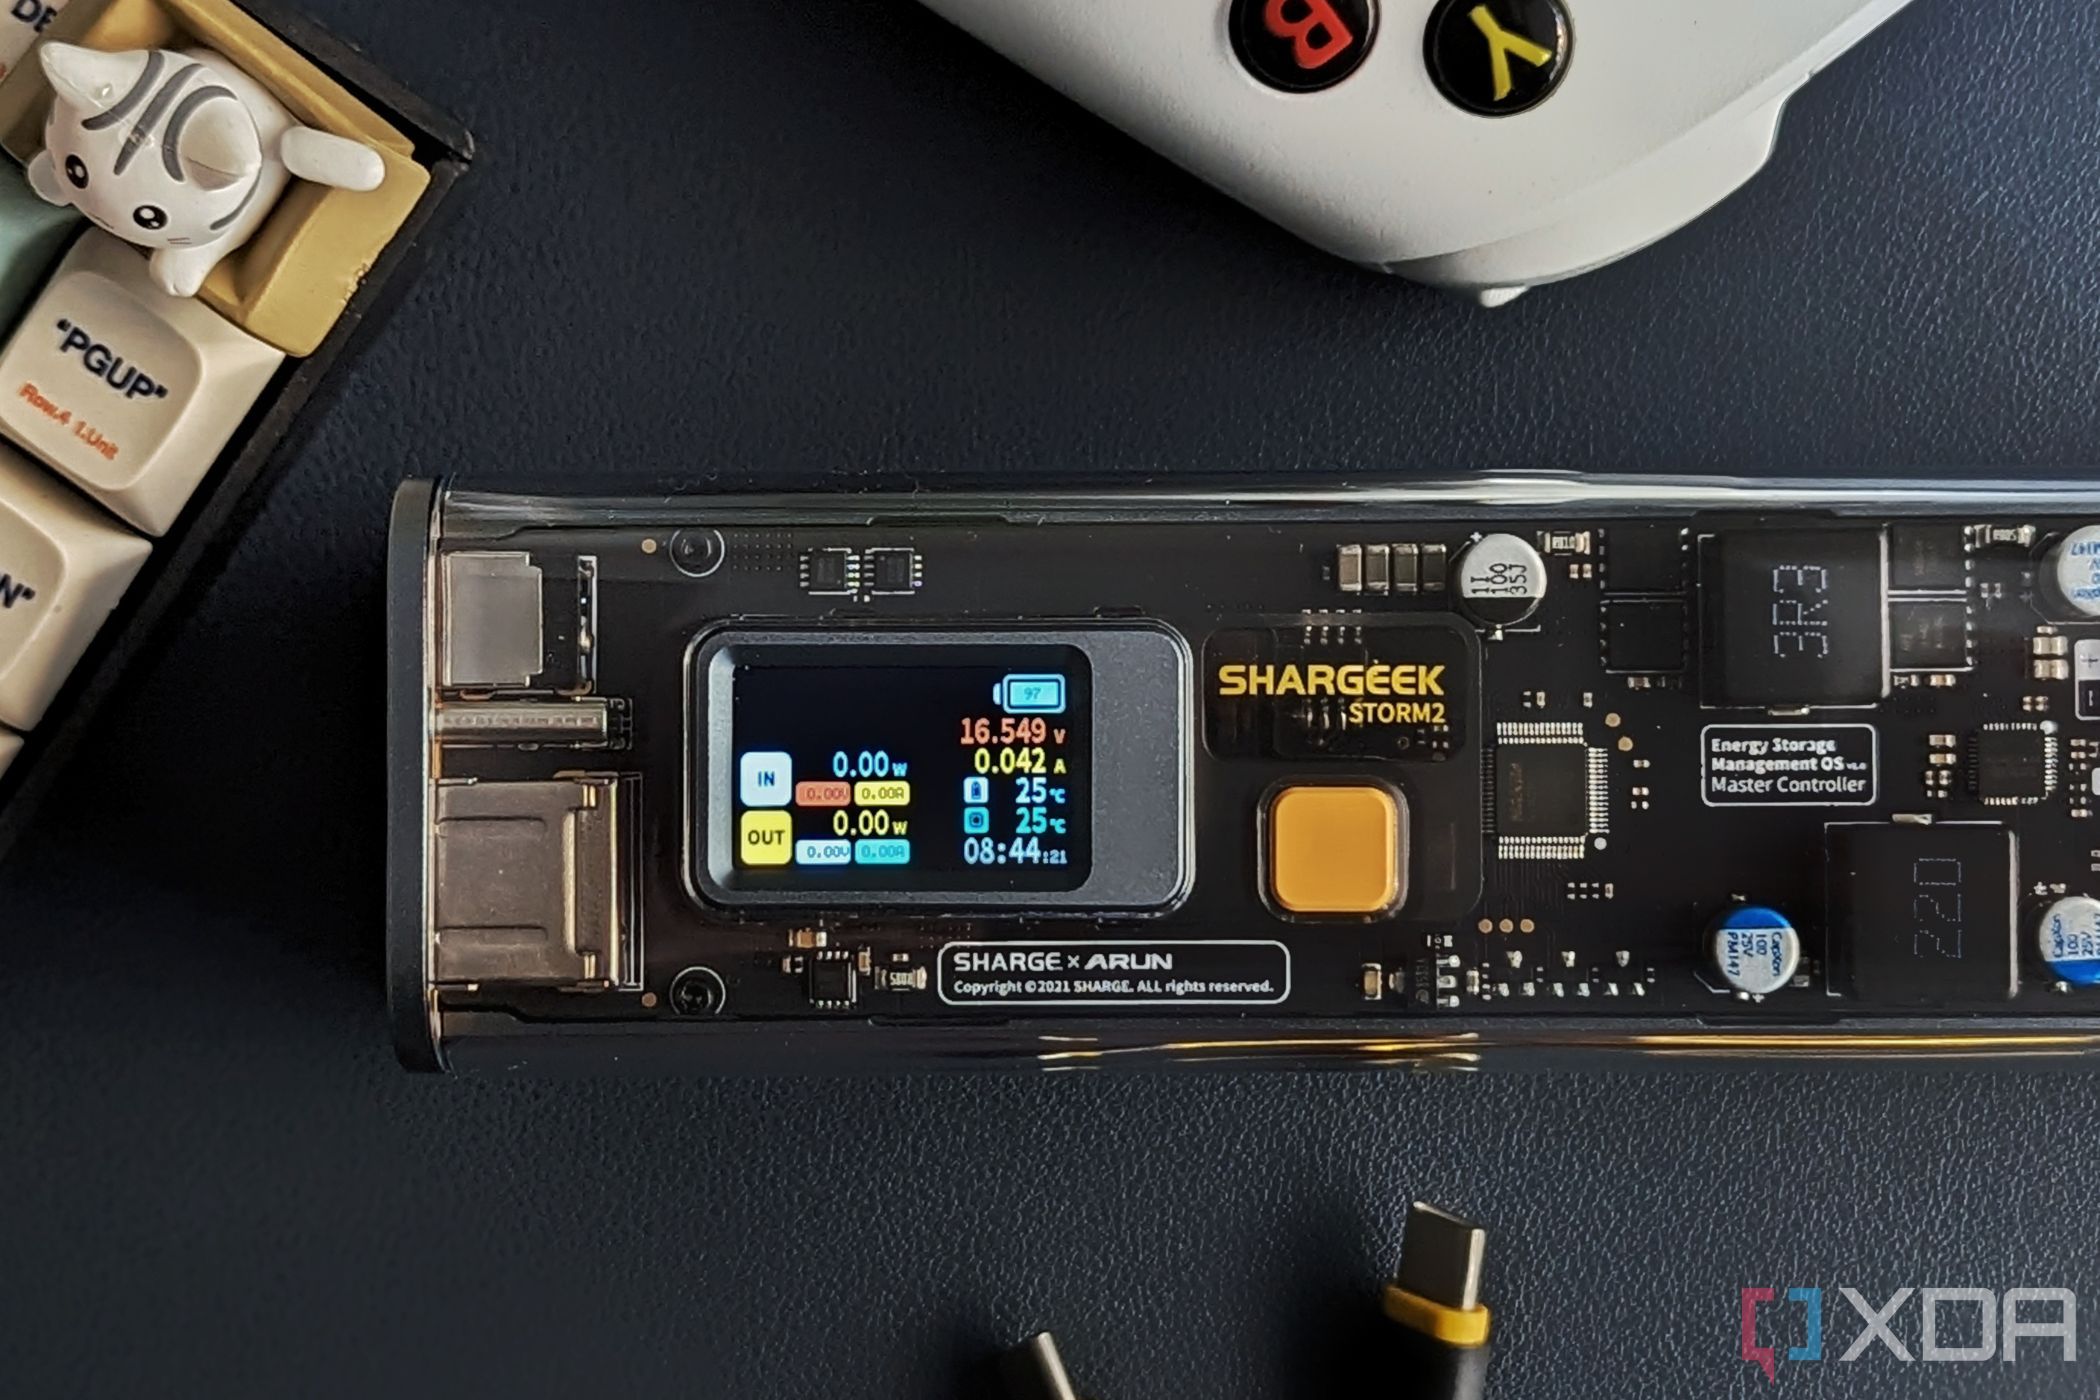 Shargeek Storm 2 review: That's one badass battery pack